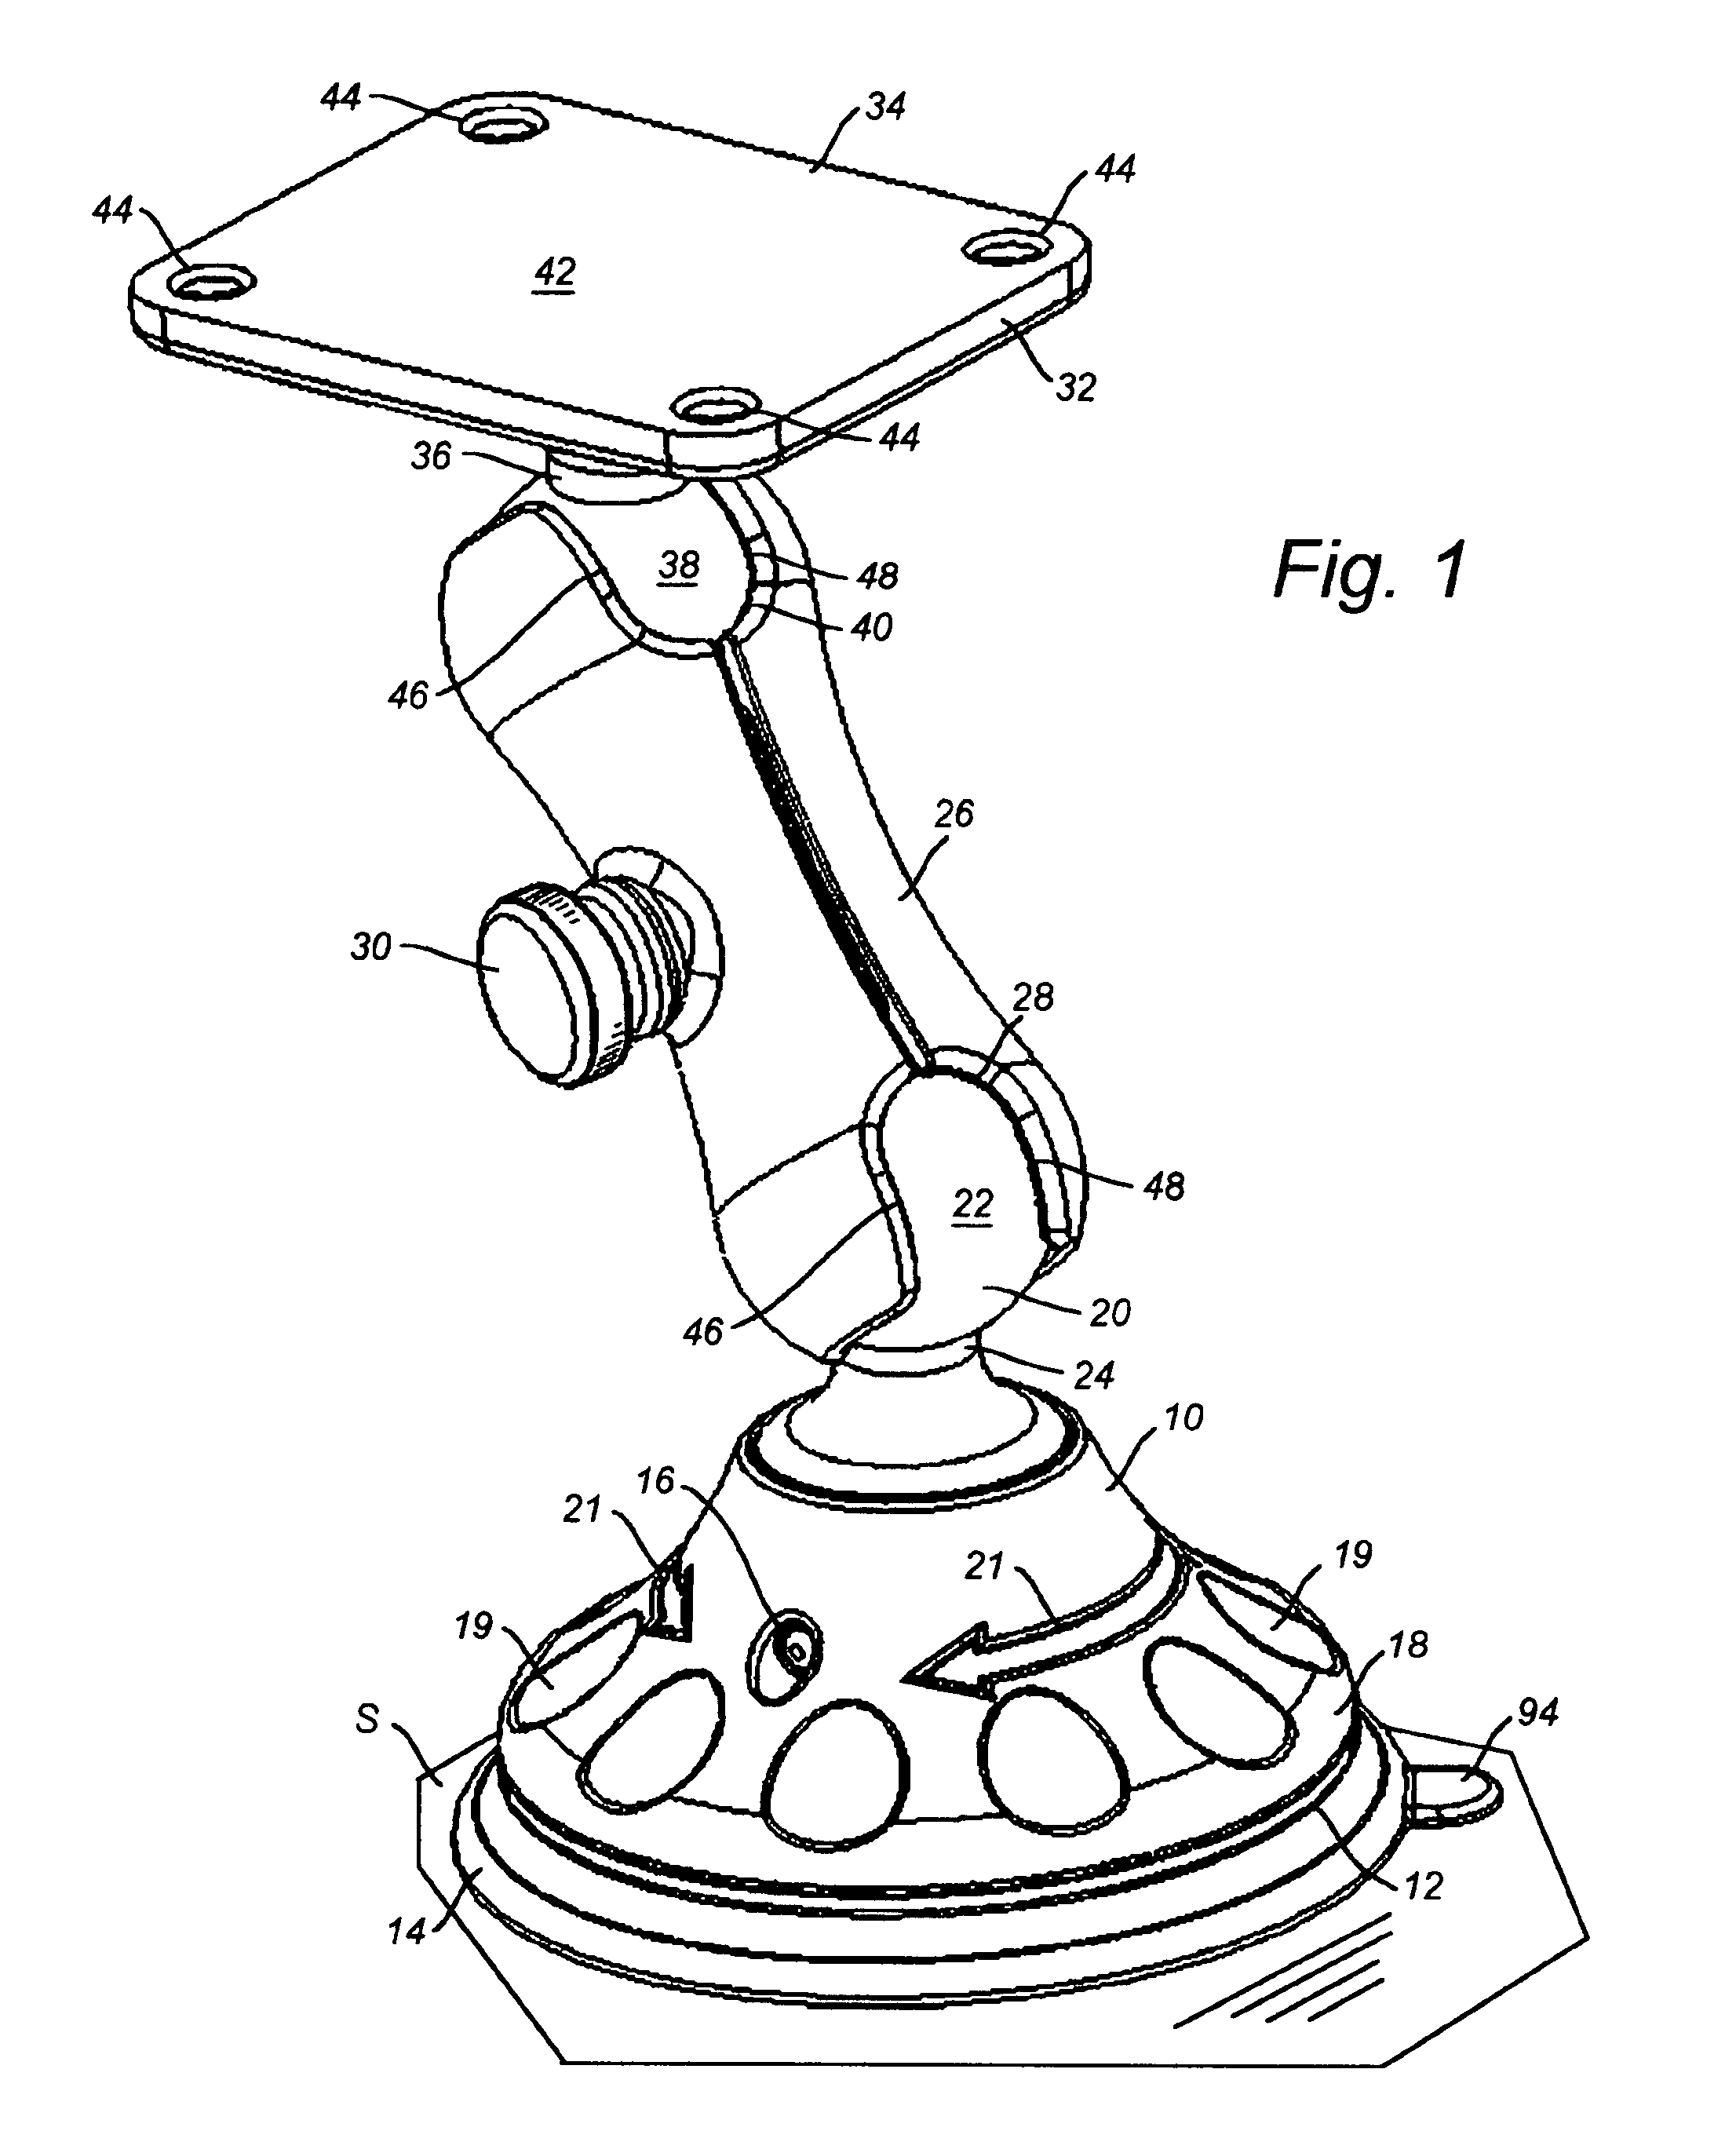 Suction cup having compact axial installation and release mechanism